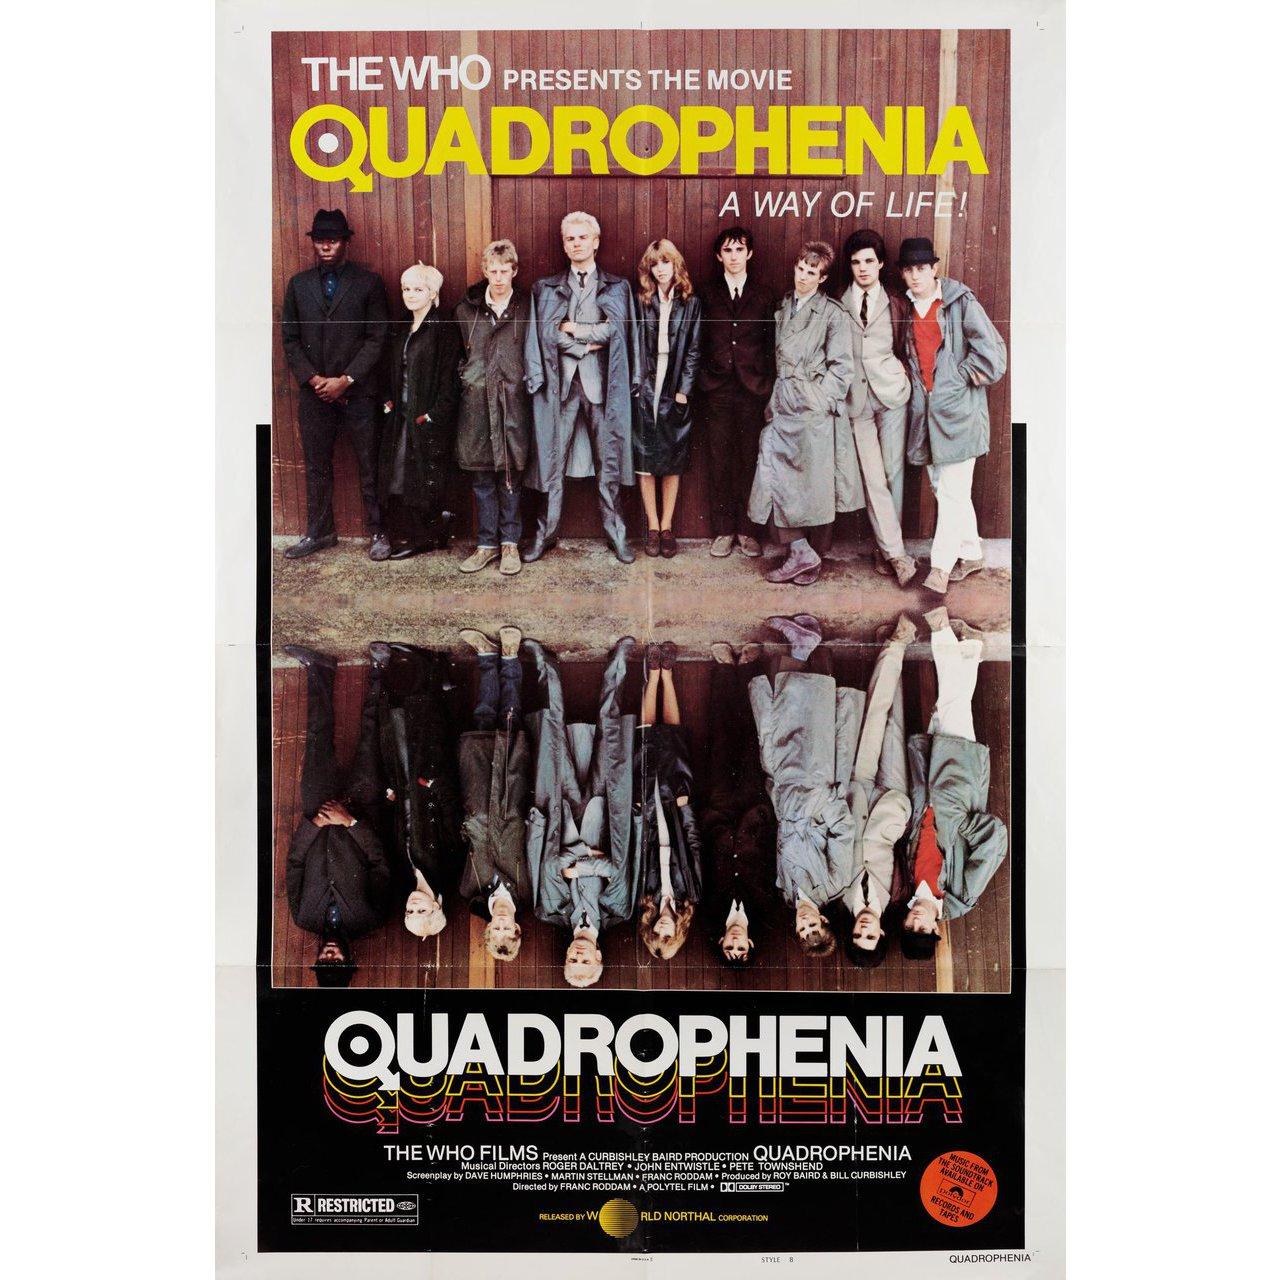 Original 1979 U.S. one sheet poster for the film Quadrophenia directed by Franc Roddam with Phil Daniels / Leslie Ash / Philip Davis / Mark Wingett. Very Good-Fine condition, folded. Many original posters were issued folded or were subsequently